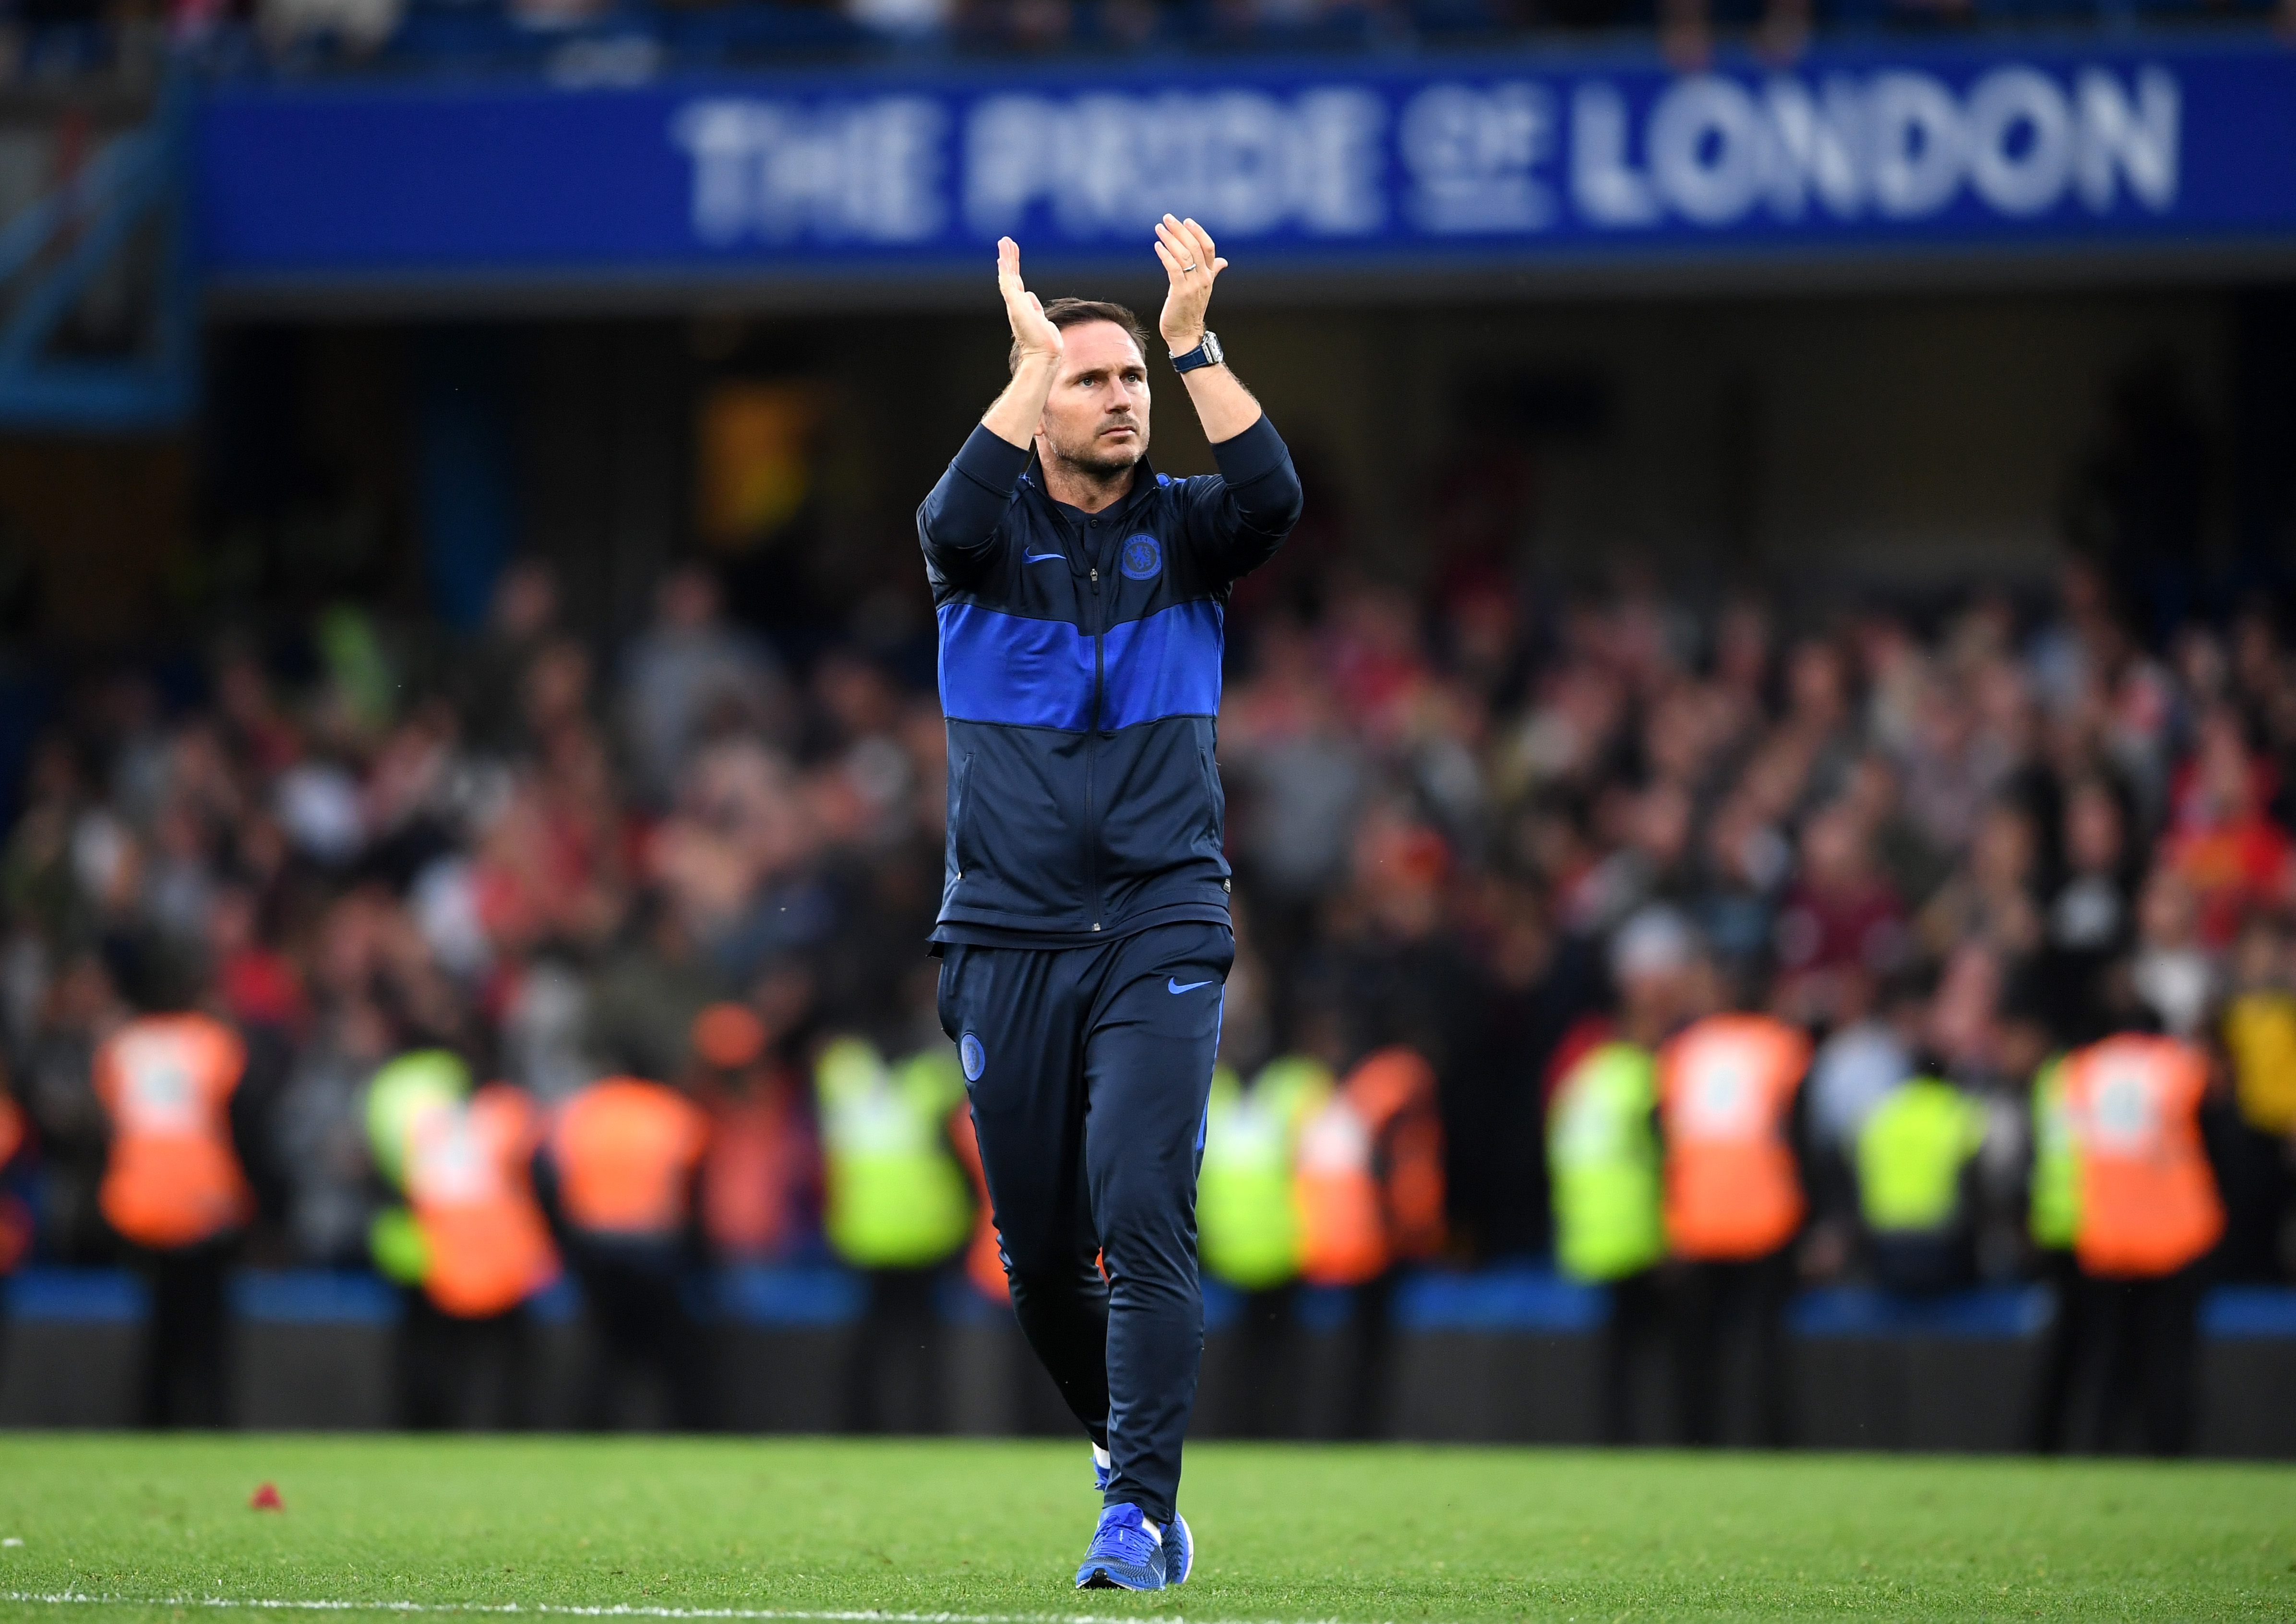 LONDON, ENGLAND - SEPTEMBER 22: Frank Lampard, Manager of Chelsea applauds fans after during the Premier League match between Chelsea FC and Liverpool FC at Stamford Bridge on September 22, 2019 in London, United Kingdom. (Photo by Laurence Griffiths/Getty Images)